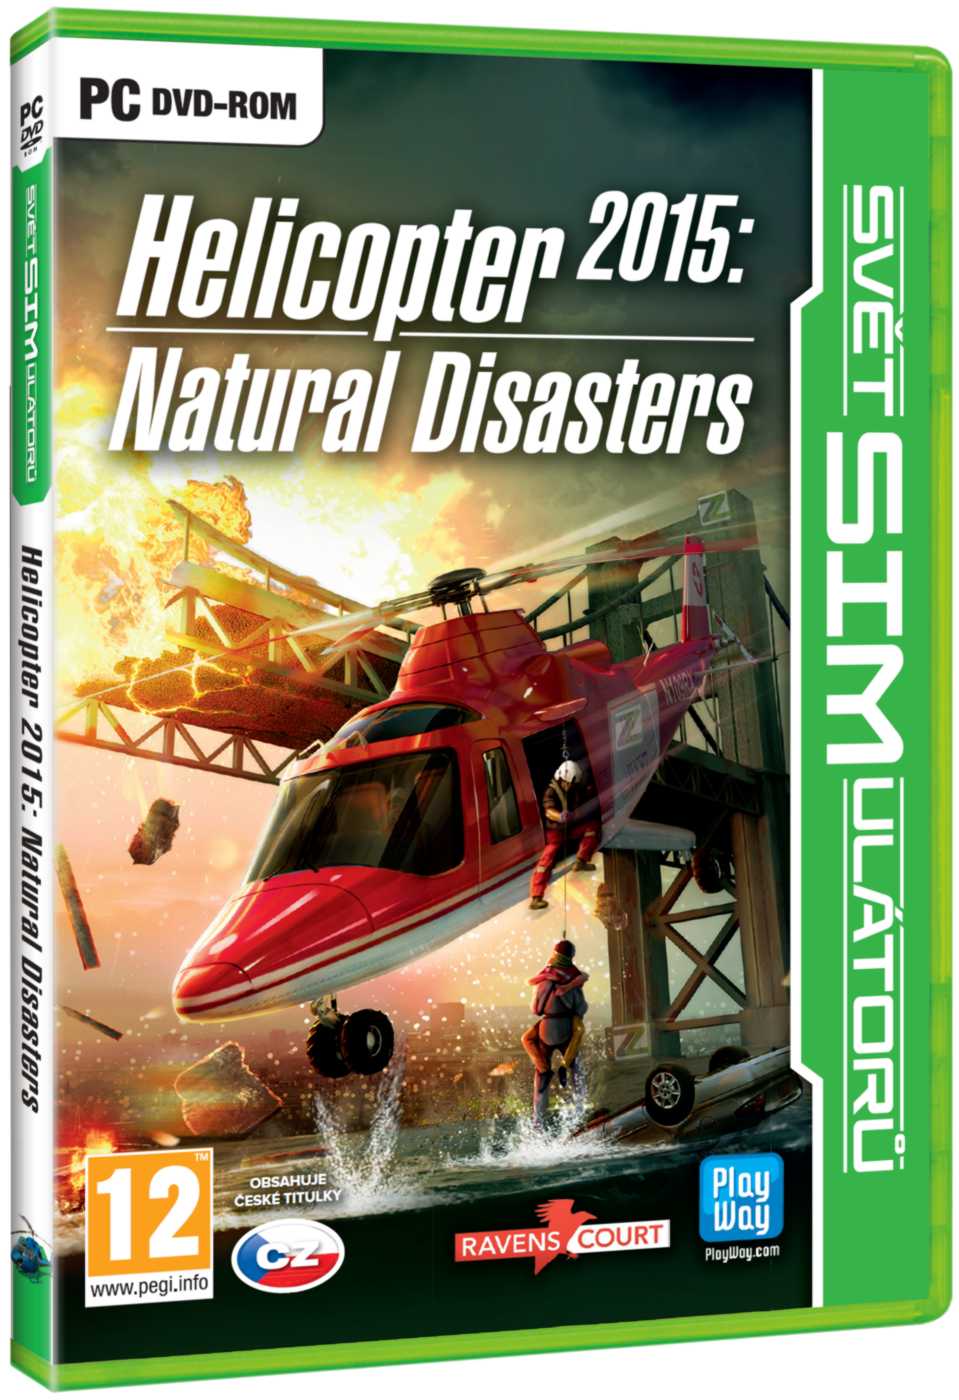 Helicopter 2015: Natural Disasters CZ - PC